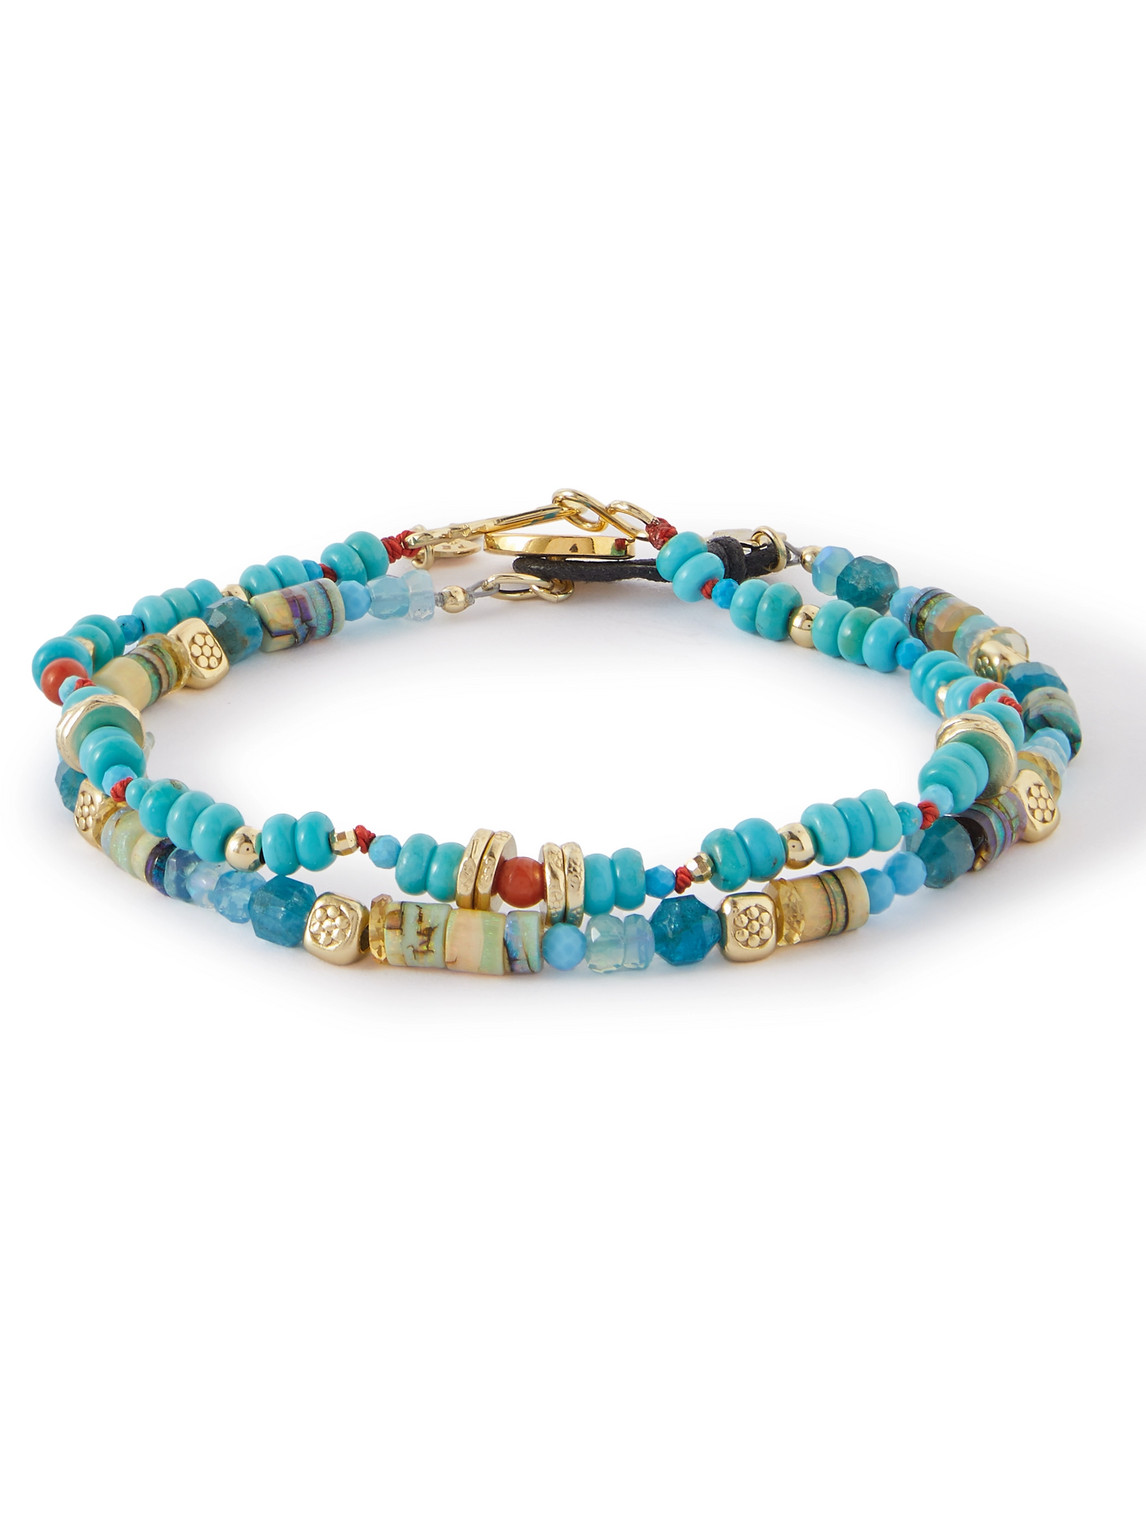 Del Mar Set of Two Gold-Plated Multi-Stone Beaded Bracelets